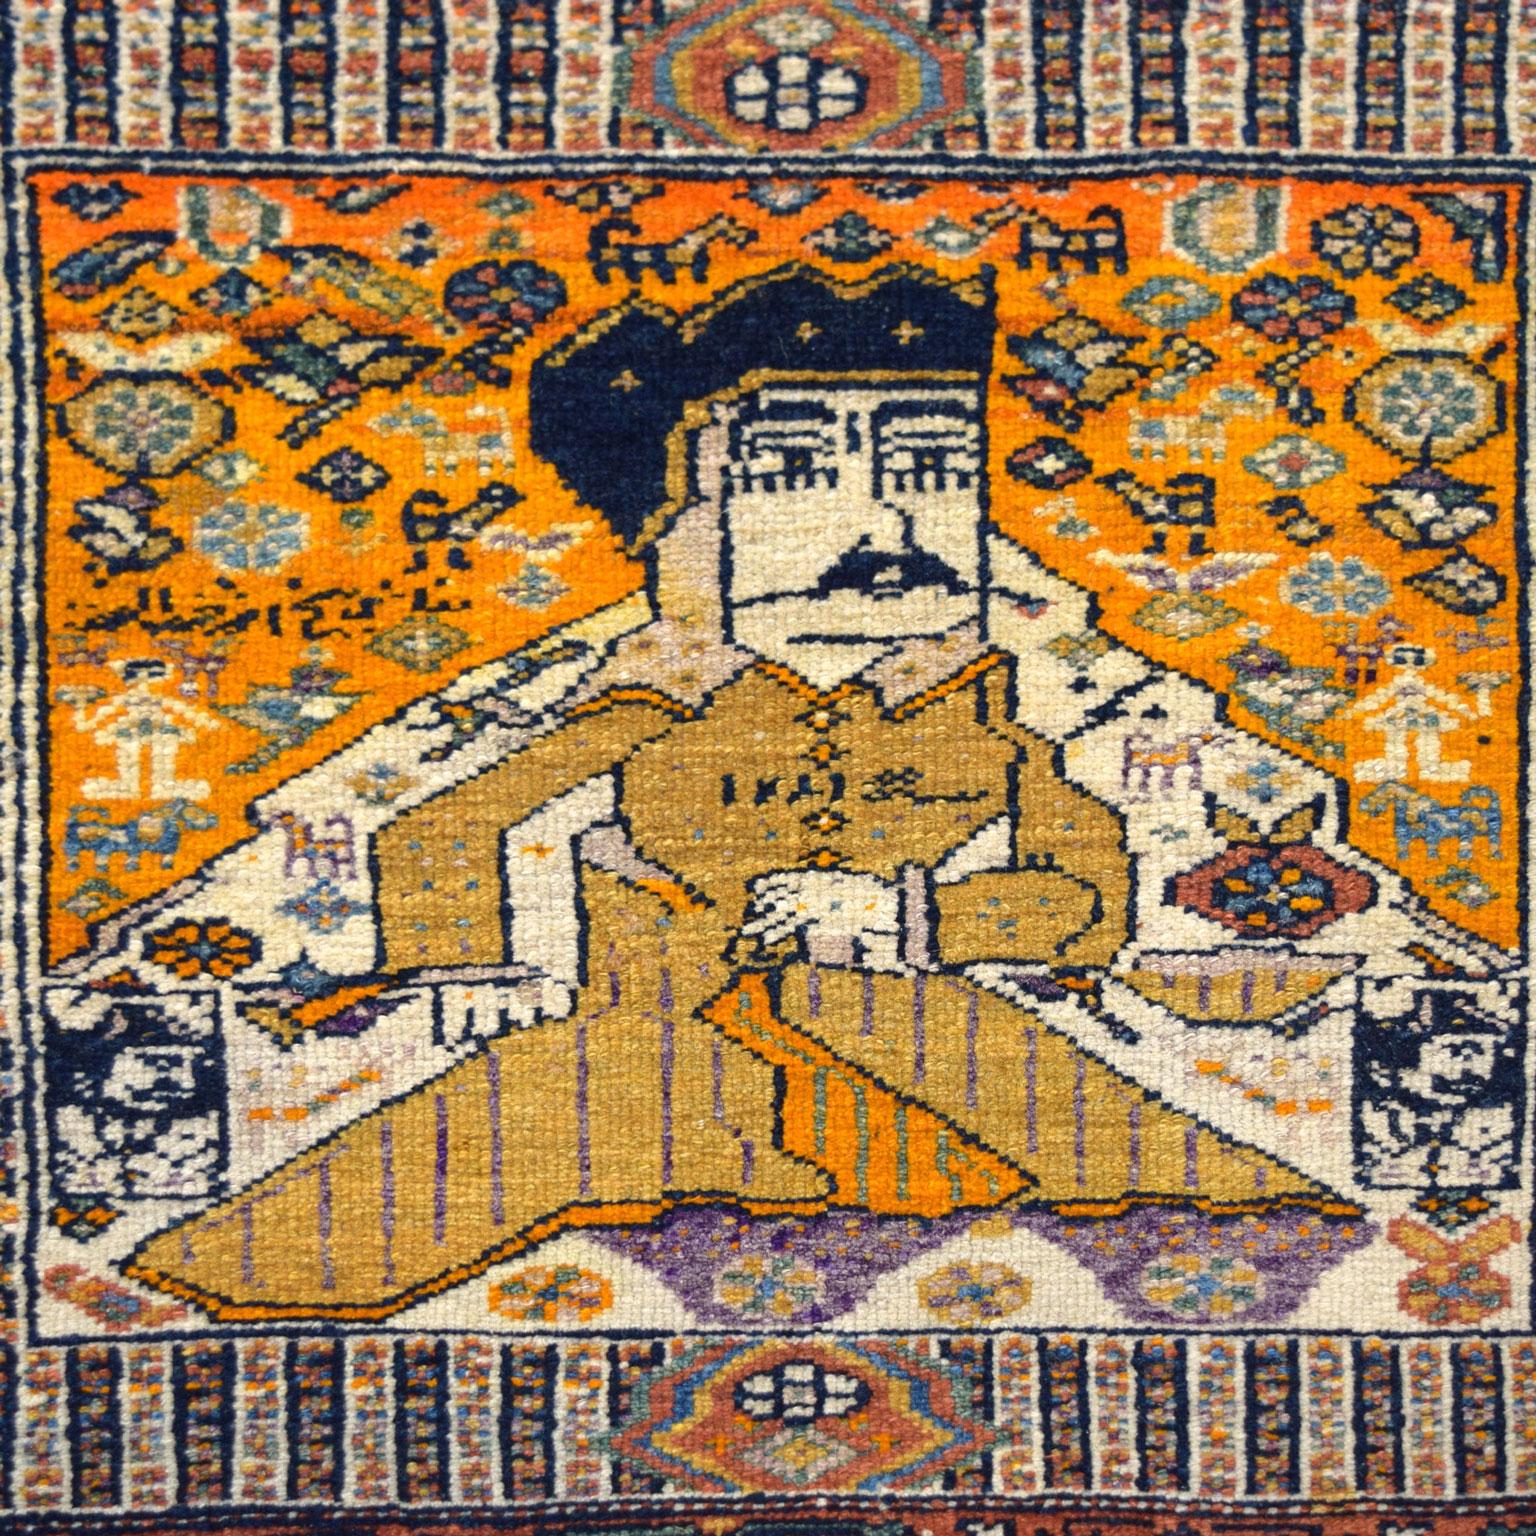 In mint condition, this small hand-knotted Persian carpet measures 2’ x 1’11” and features the inspiring and legendary Persian ruler, Karim Khan Zand. Crafted circa 1880, this carpet has an immense amount of detail within the foreground and border,